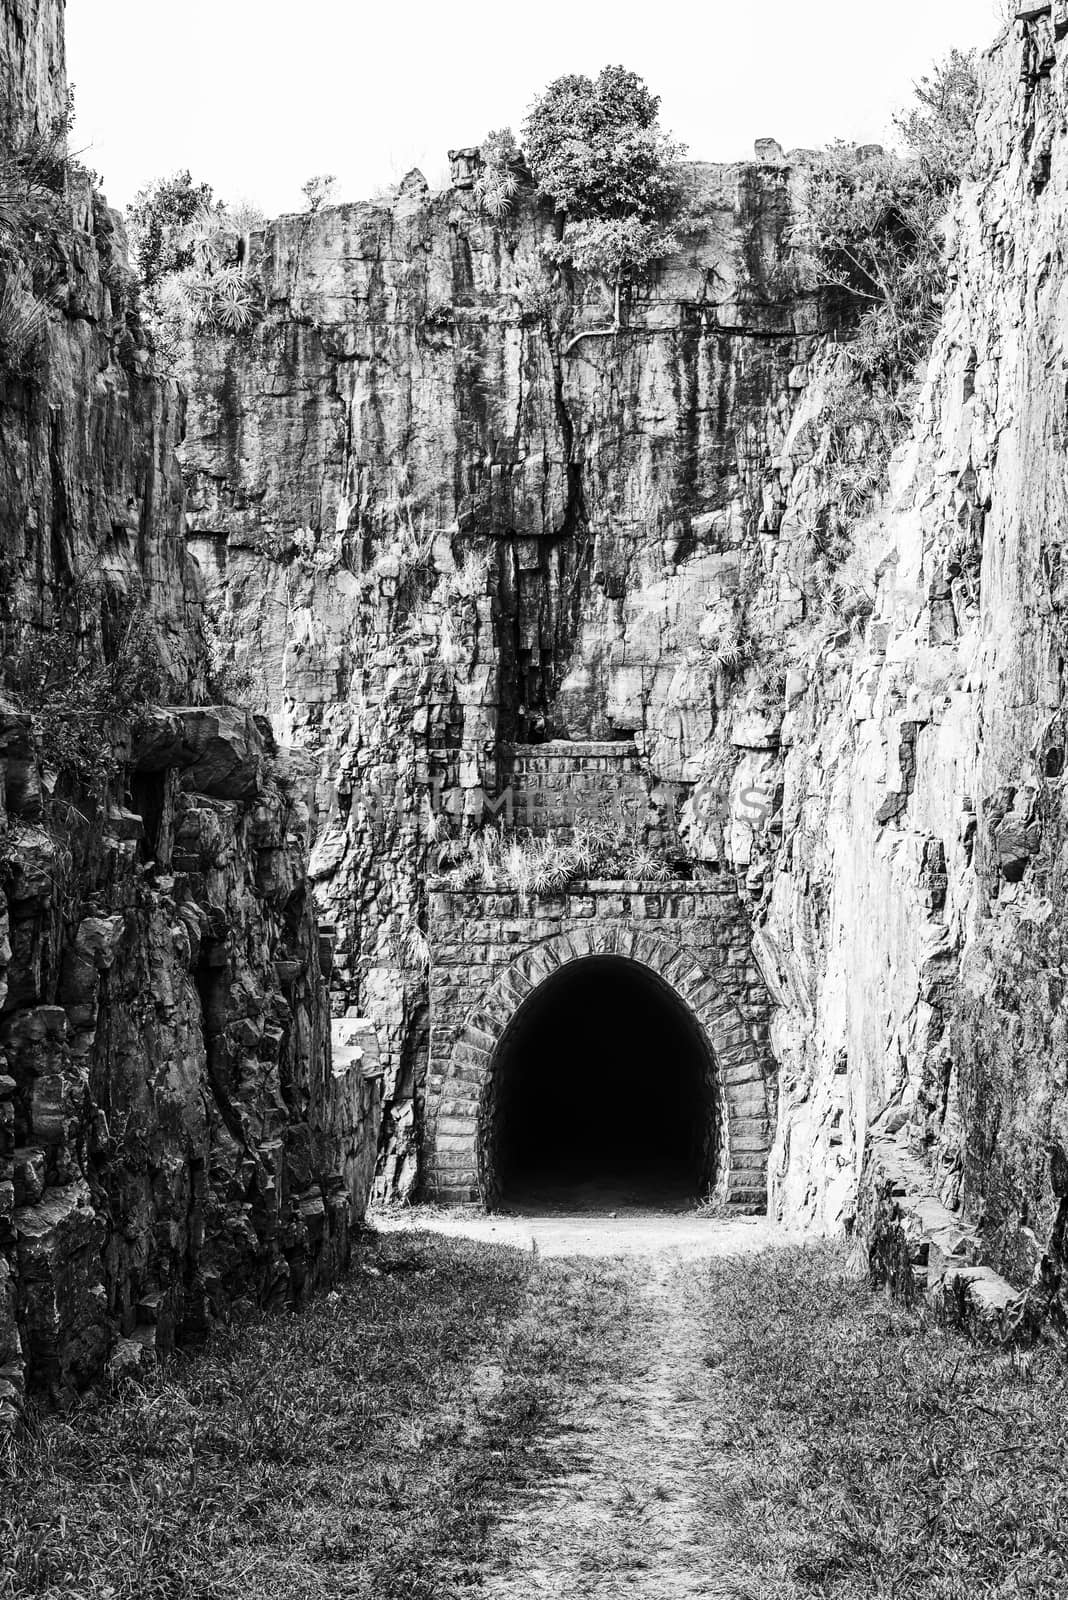 The western entrance of the historic railroad tunnel at Waterval Boven in Mpumalanga. Monochrome